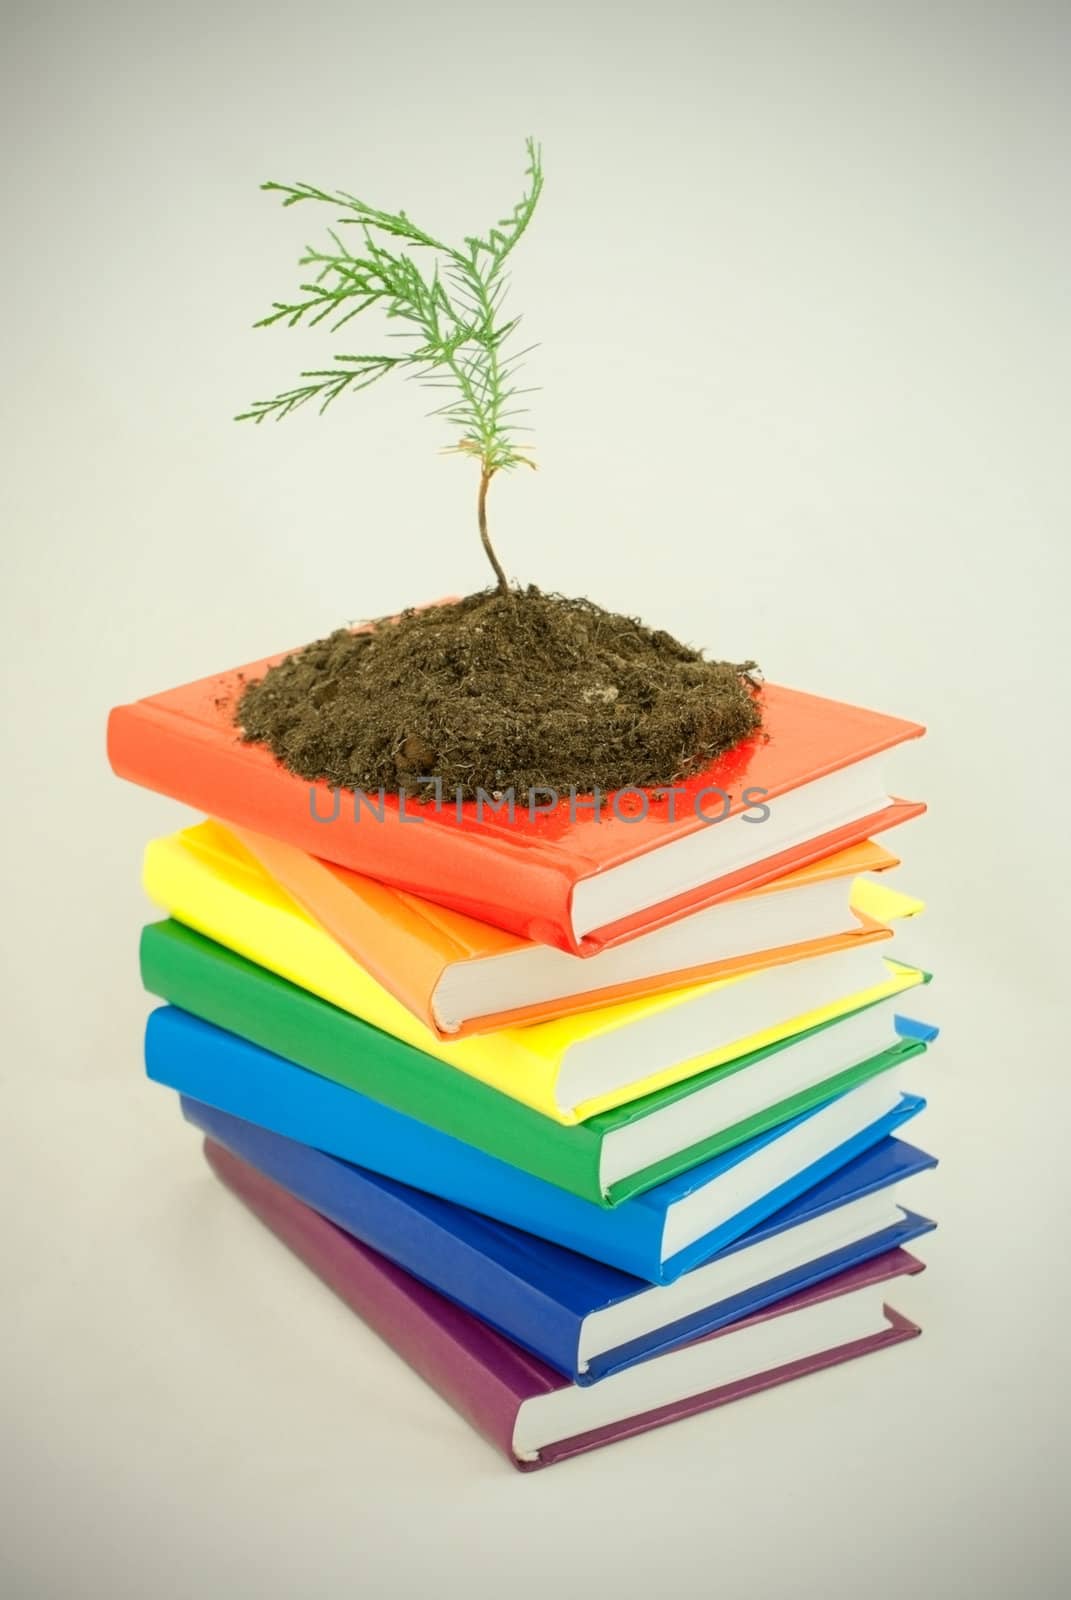 Tree seedling on the stack of colorful books by AndreyKr